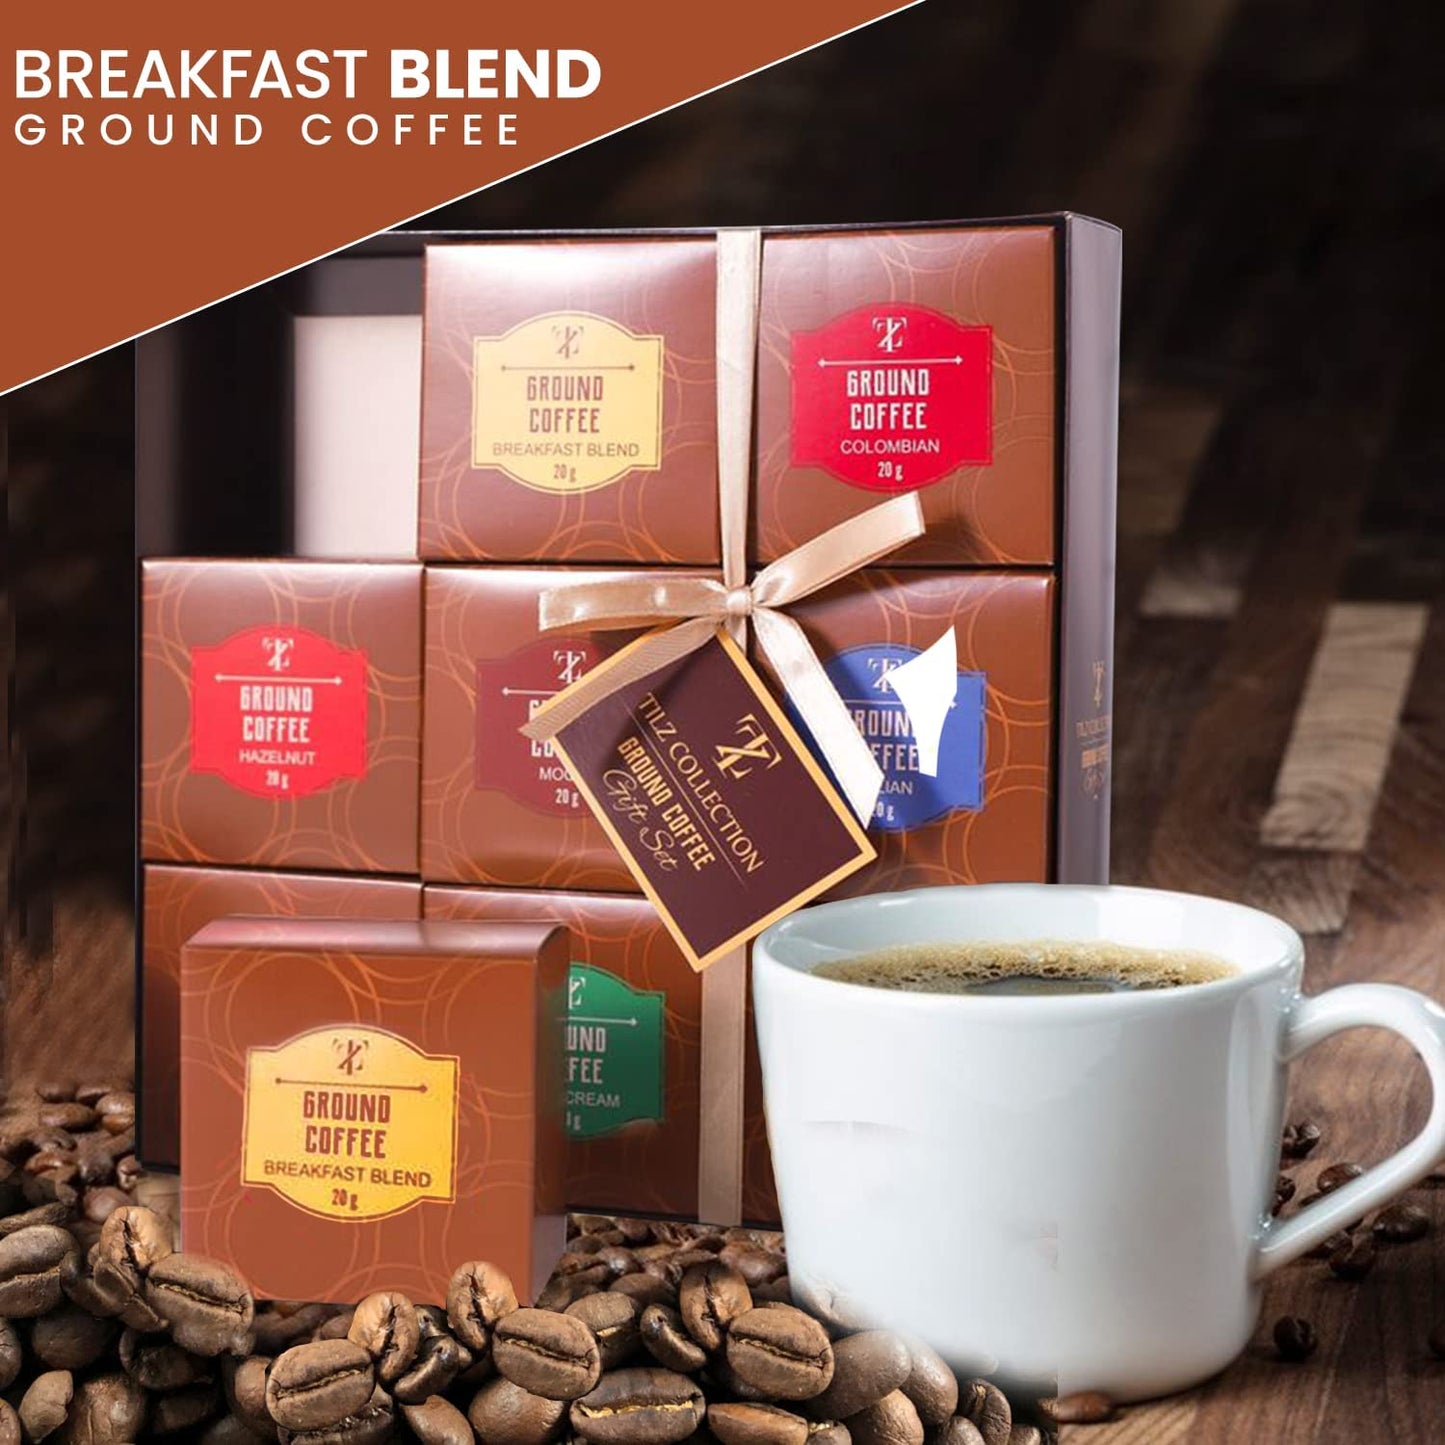 Coffee Gift Set - Gourmet Ground Coffee Gifts, 9 Assorted Flavours Including Amaretto Dark Roast French Vanilla Mocha Italian Colombian, Gifts for Coffee Lovers, Gifts for Men, Women, Gifts for Her